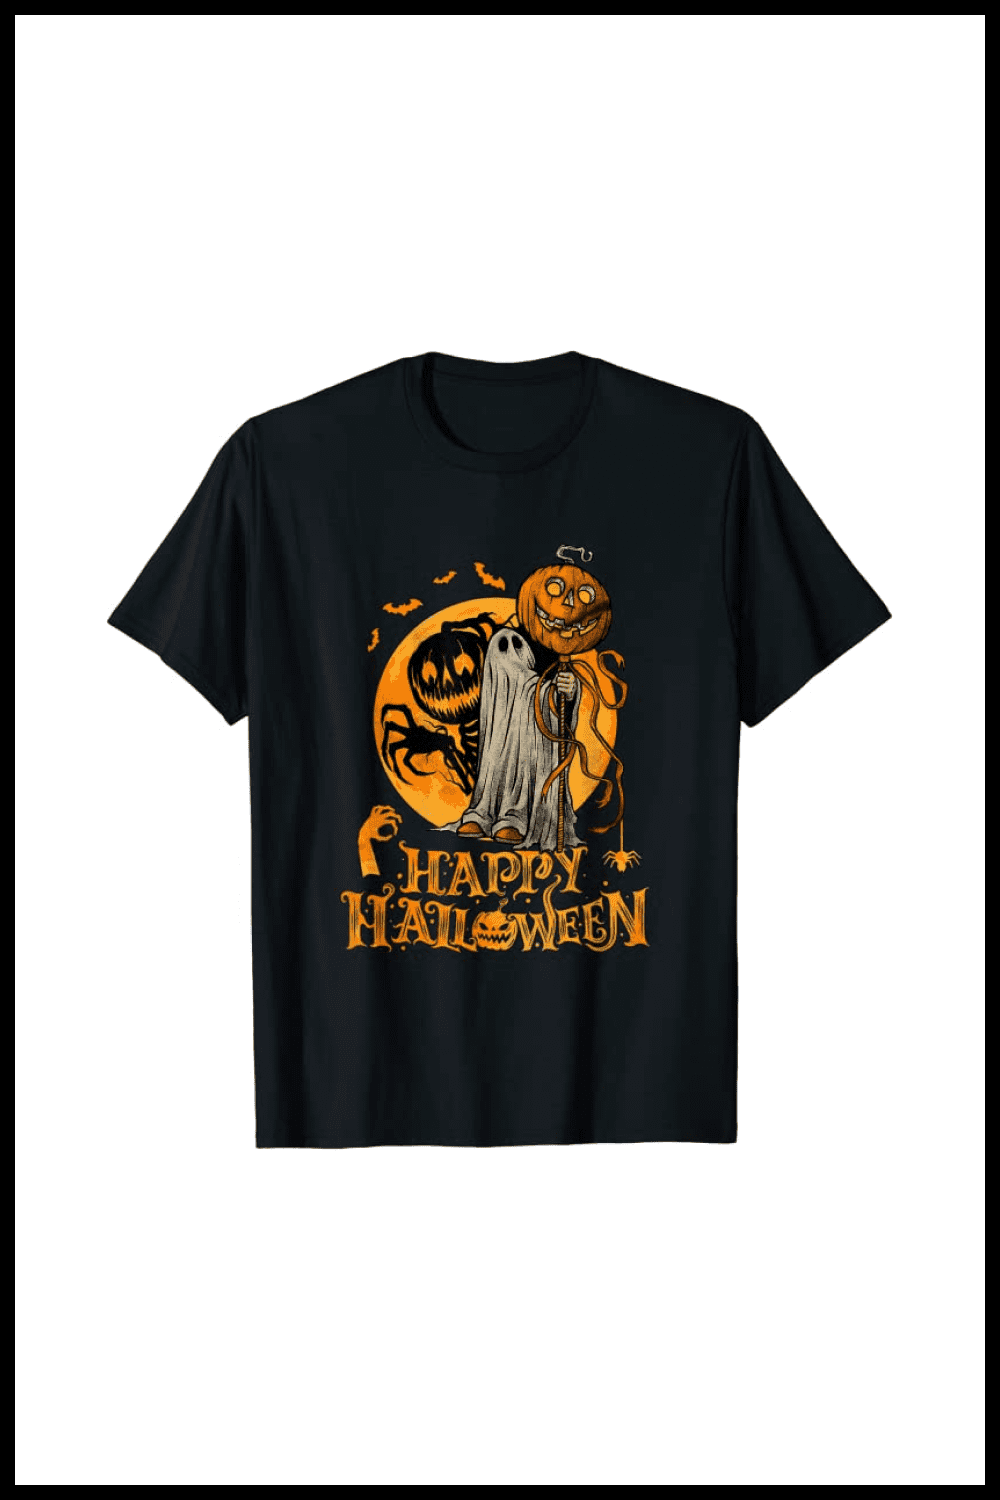 Black t-shirt with ghost, skeleton and pumpkin.